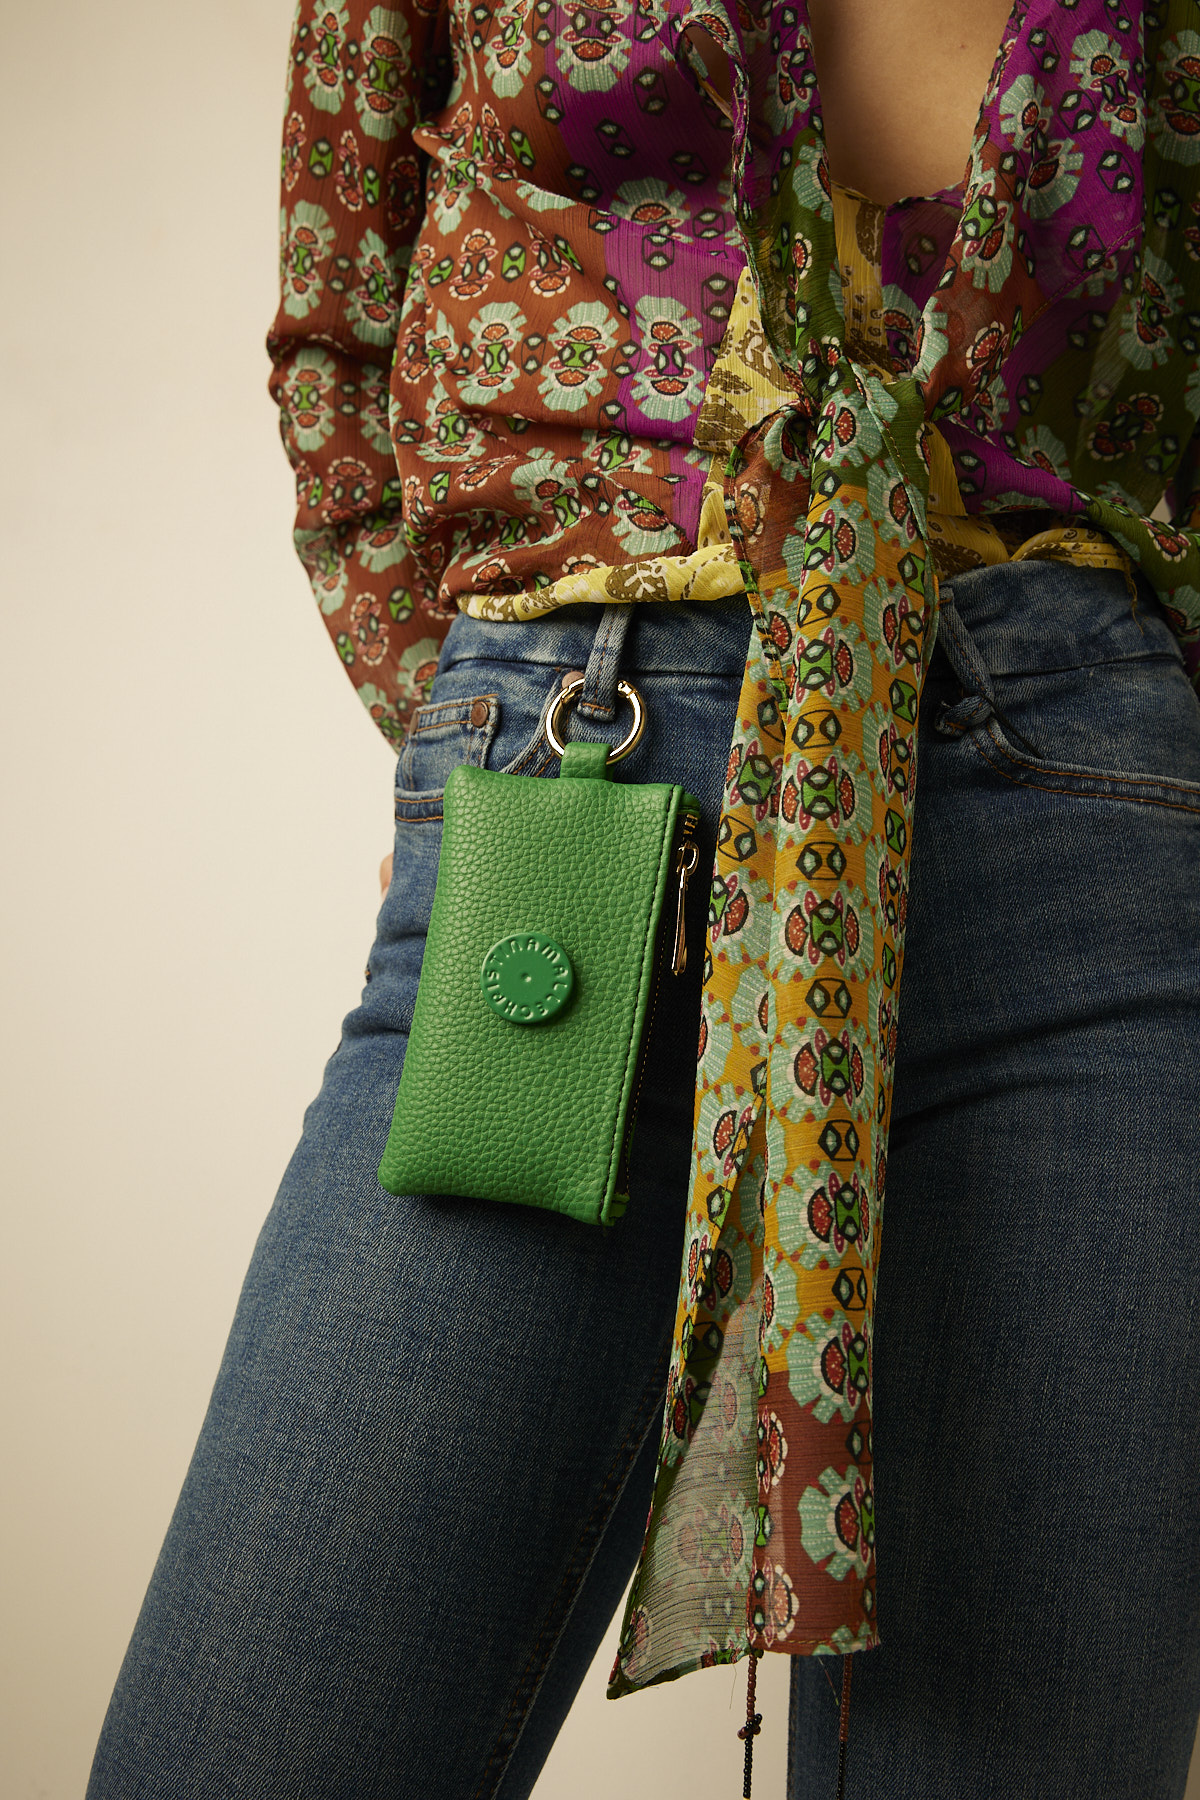 Image CHRISTINA MALLE KEYCHAIN GREEN ACCESSORIES 1